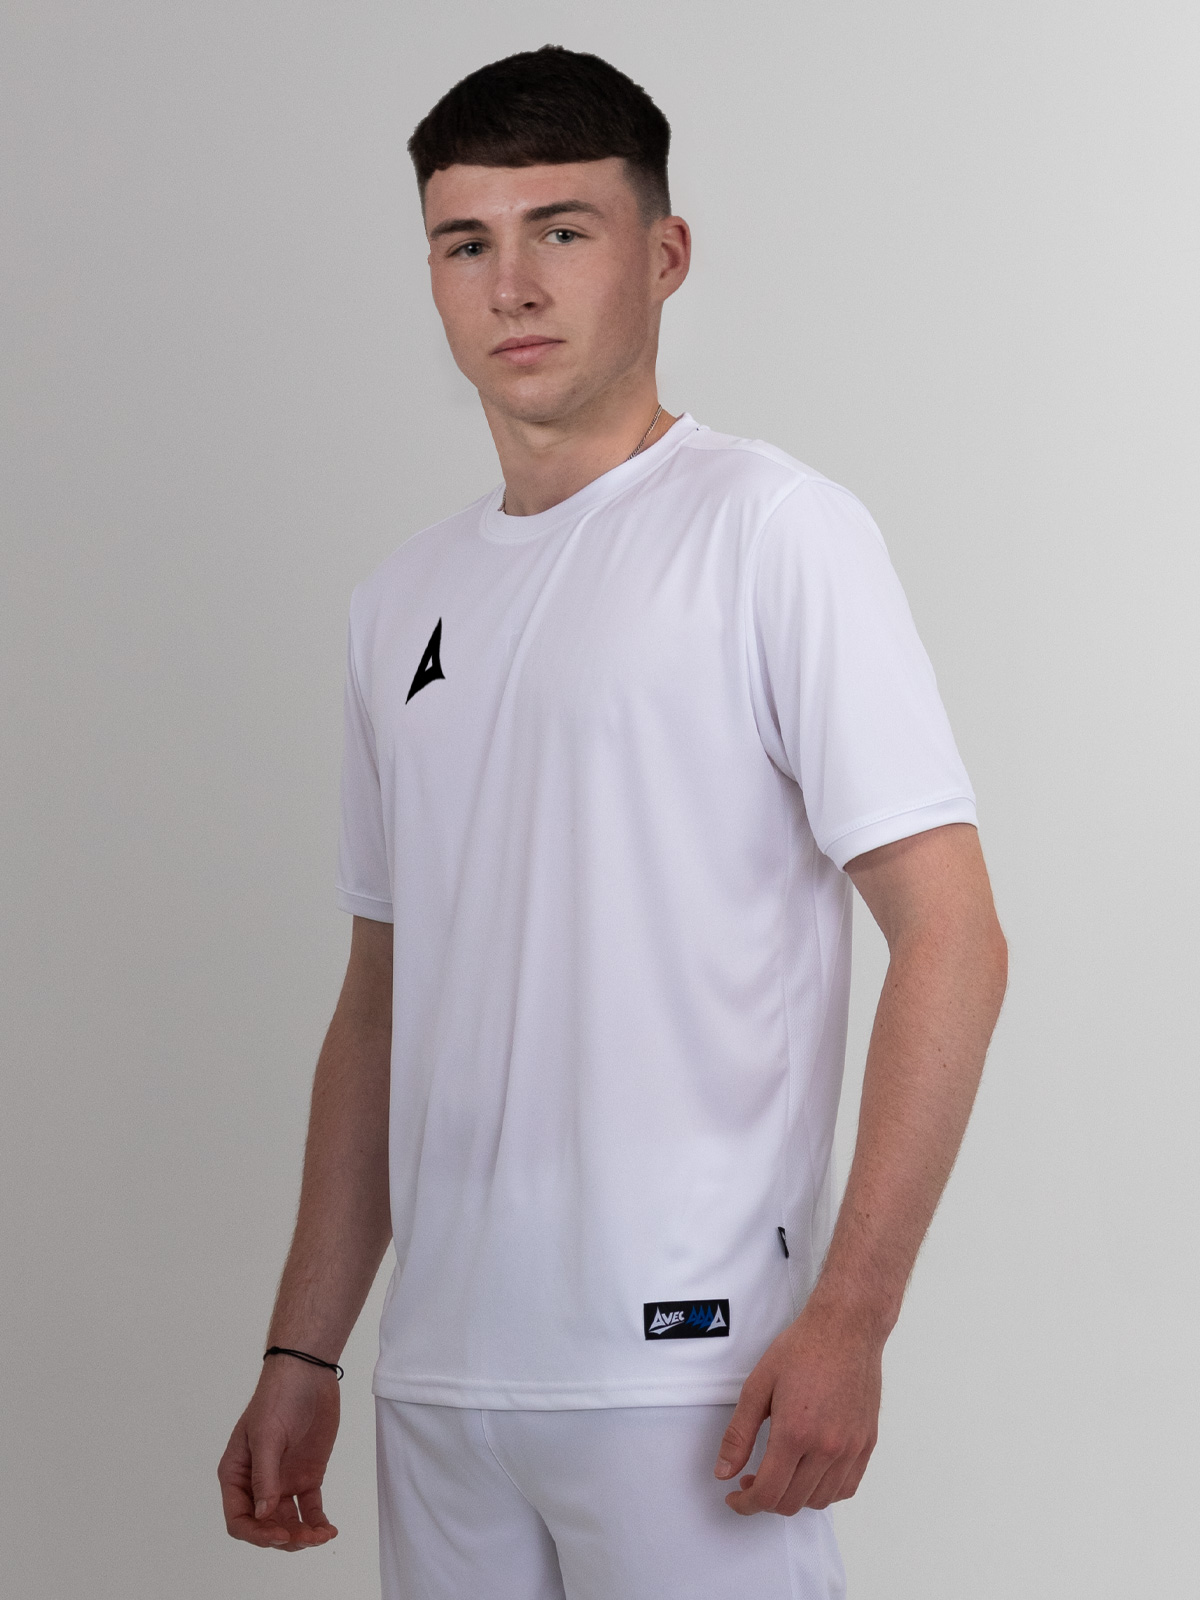 a classic white football shirt with black logo can be worn with white shorts or black shorts